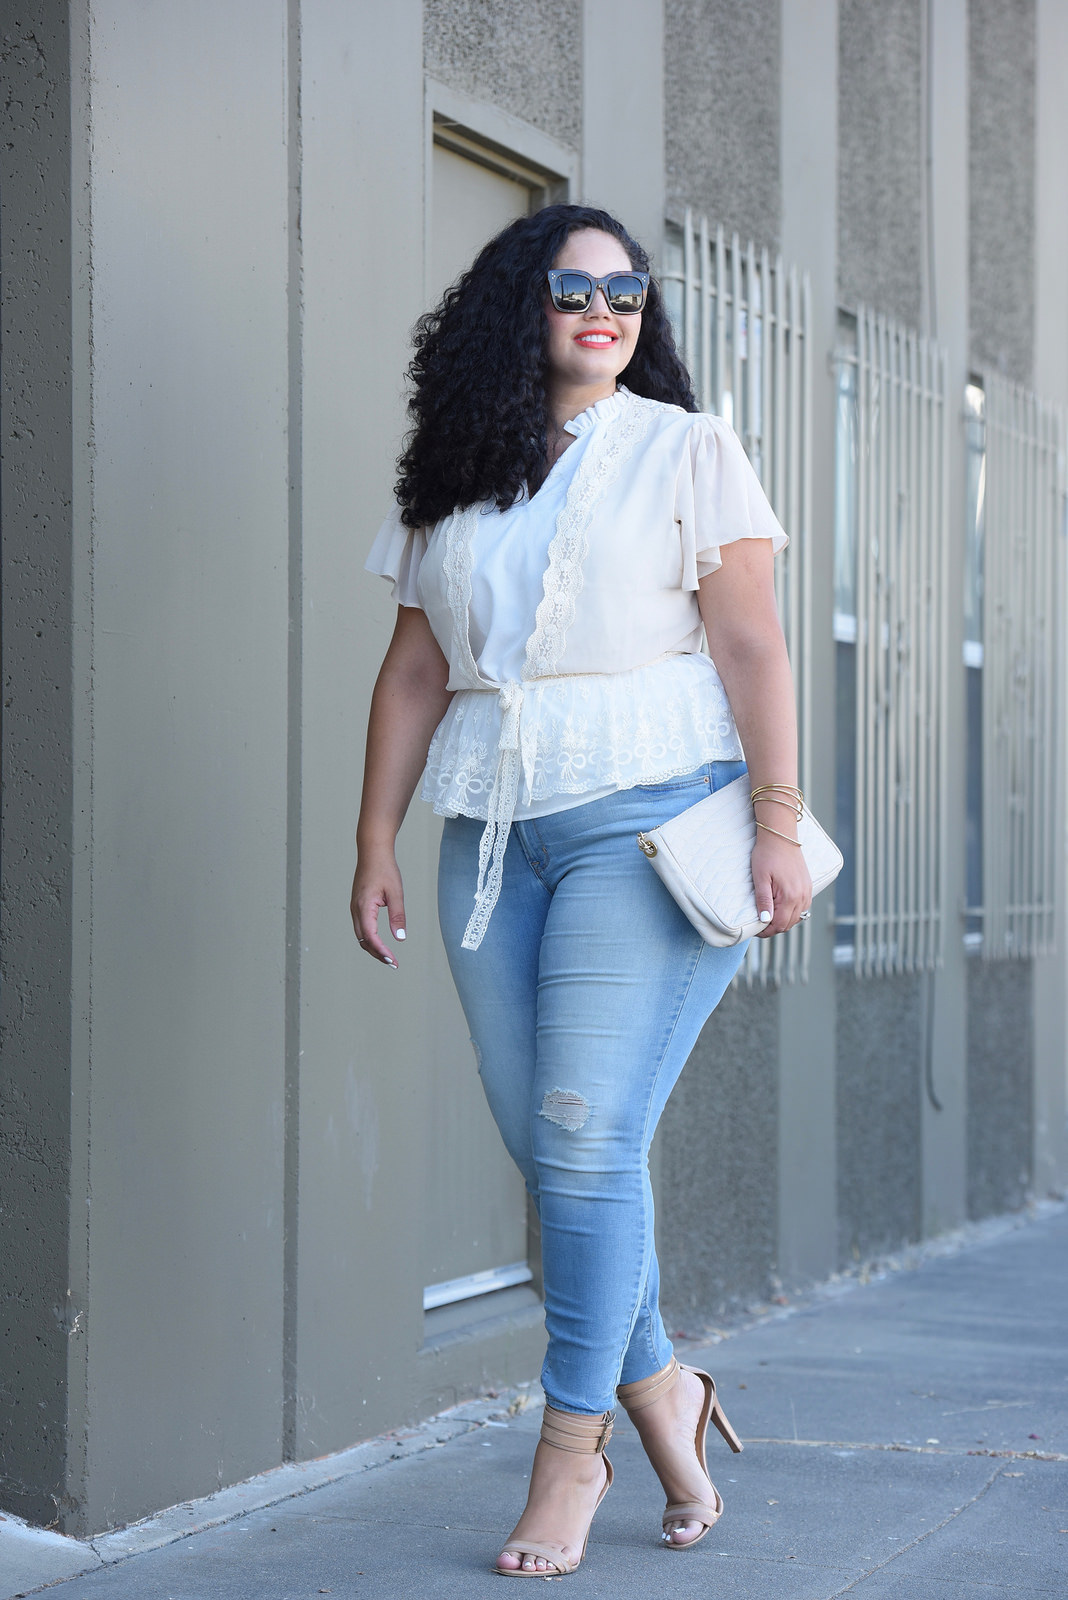 Tanesha Awasthi (also known as Girl With Curves) wearing plus size skinny jeans, lace cardigan and heels.